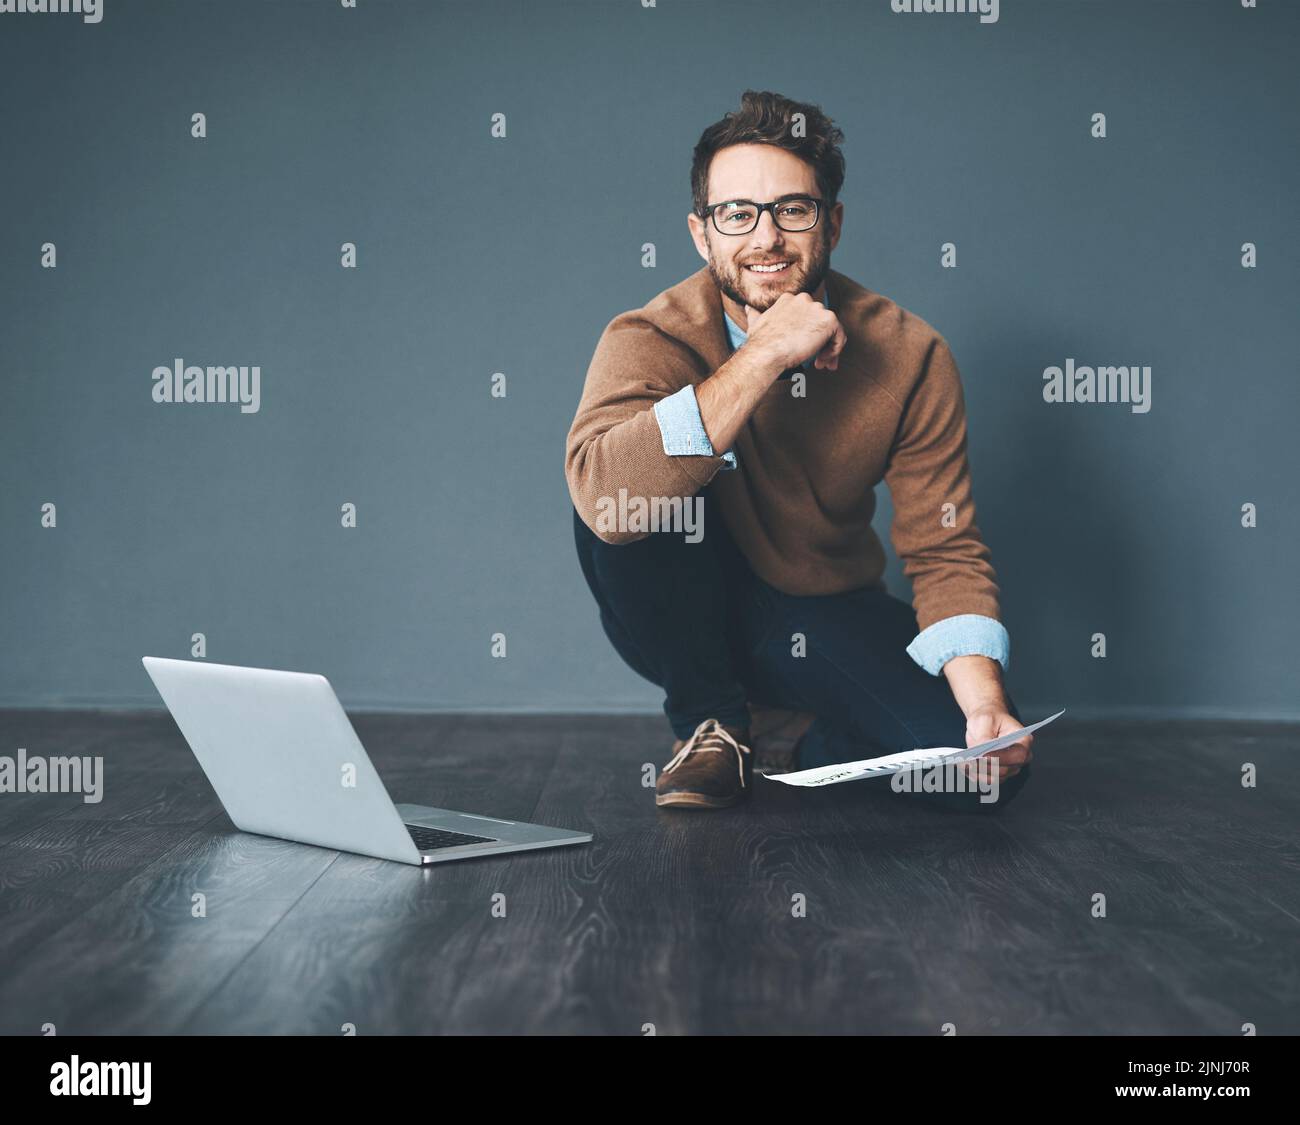 Happy business man working on laptop, doing tax paperwork and going through finance document while sitting on floor in an office at work. Portrait of Stock Photo